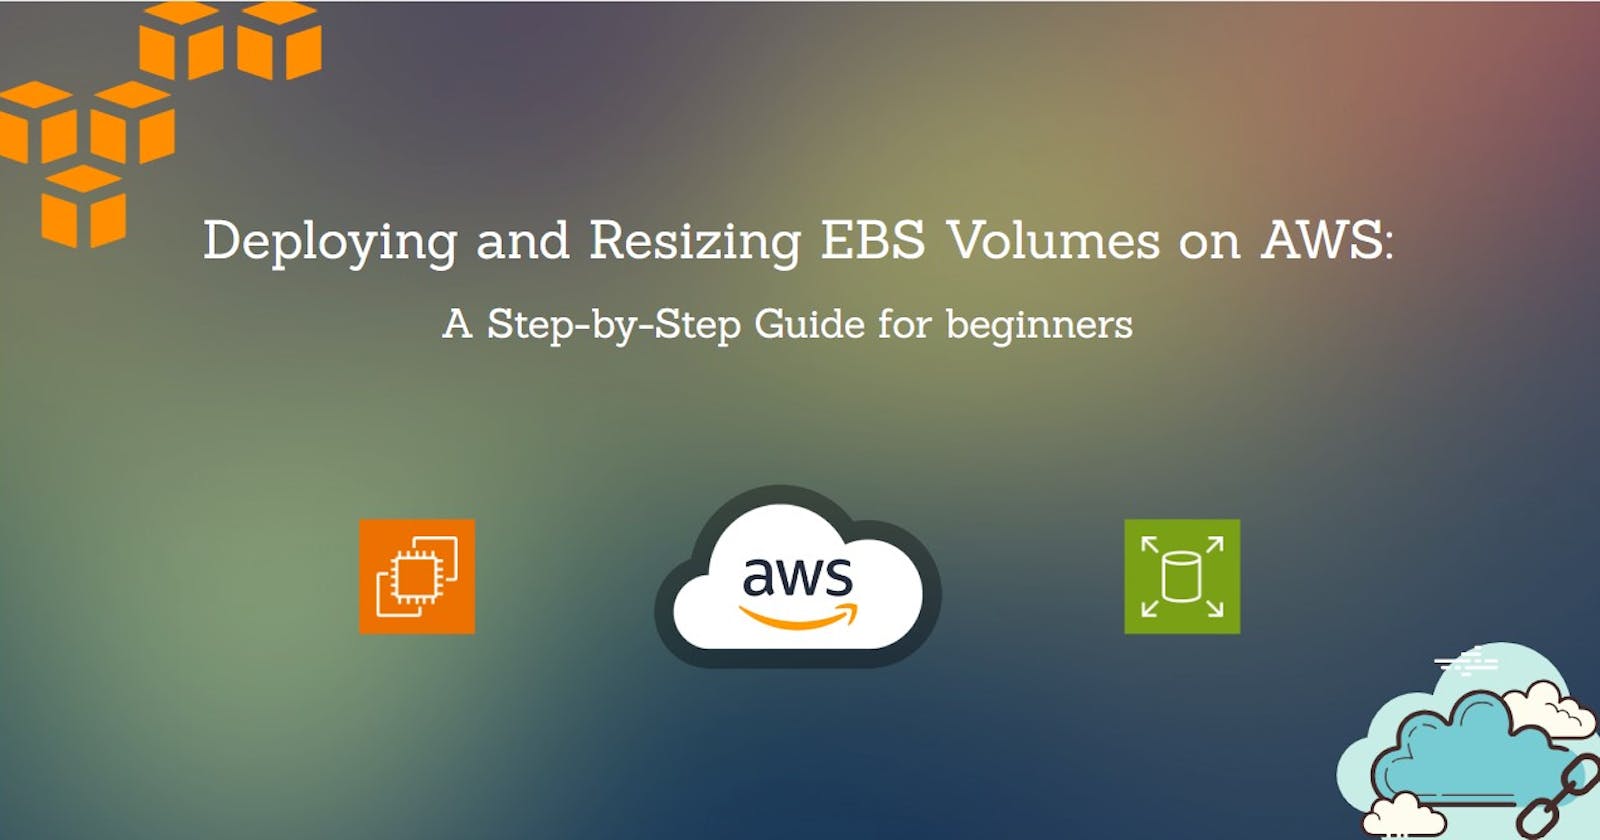 Deploying and Resizing EBS Volumes on AWS: A Step-by-Step Guide for beginners